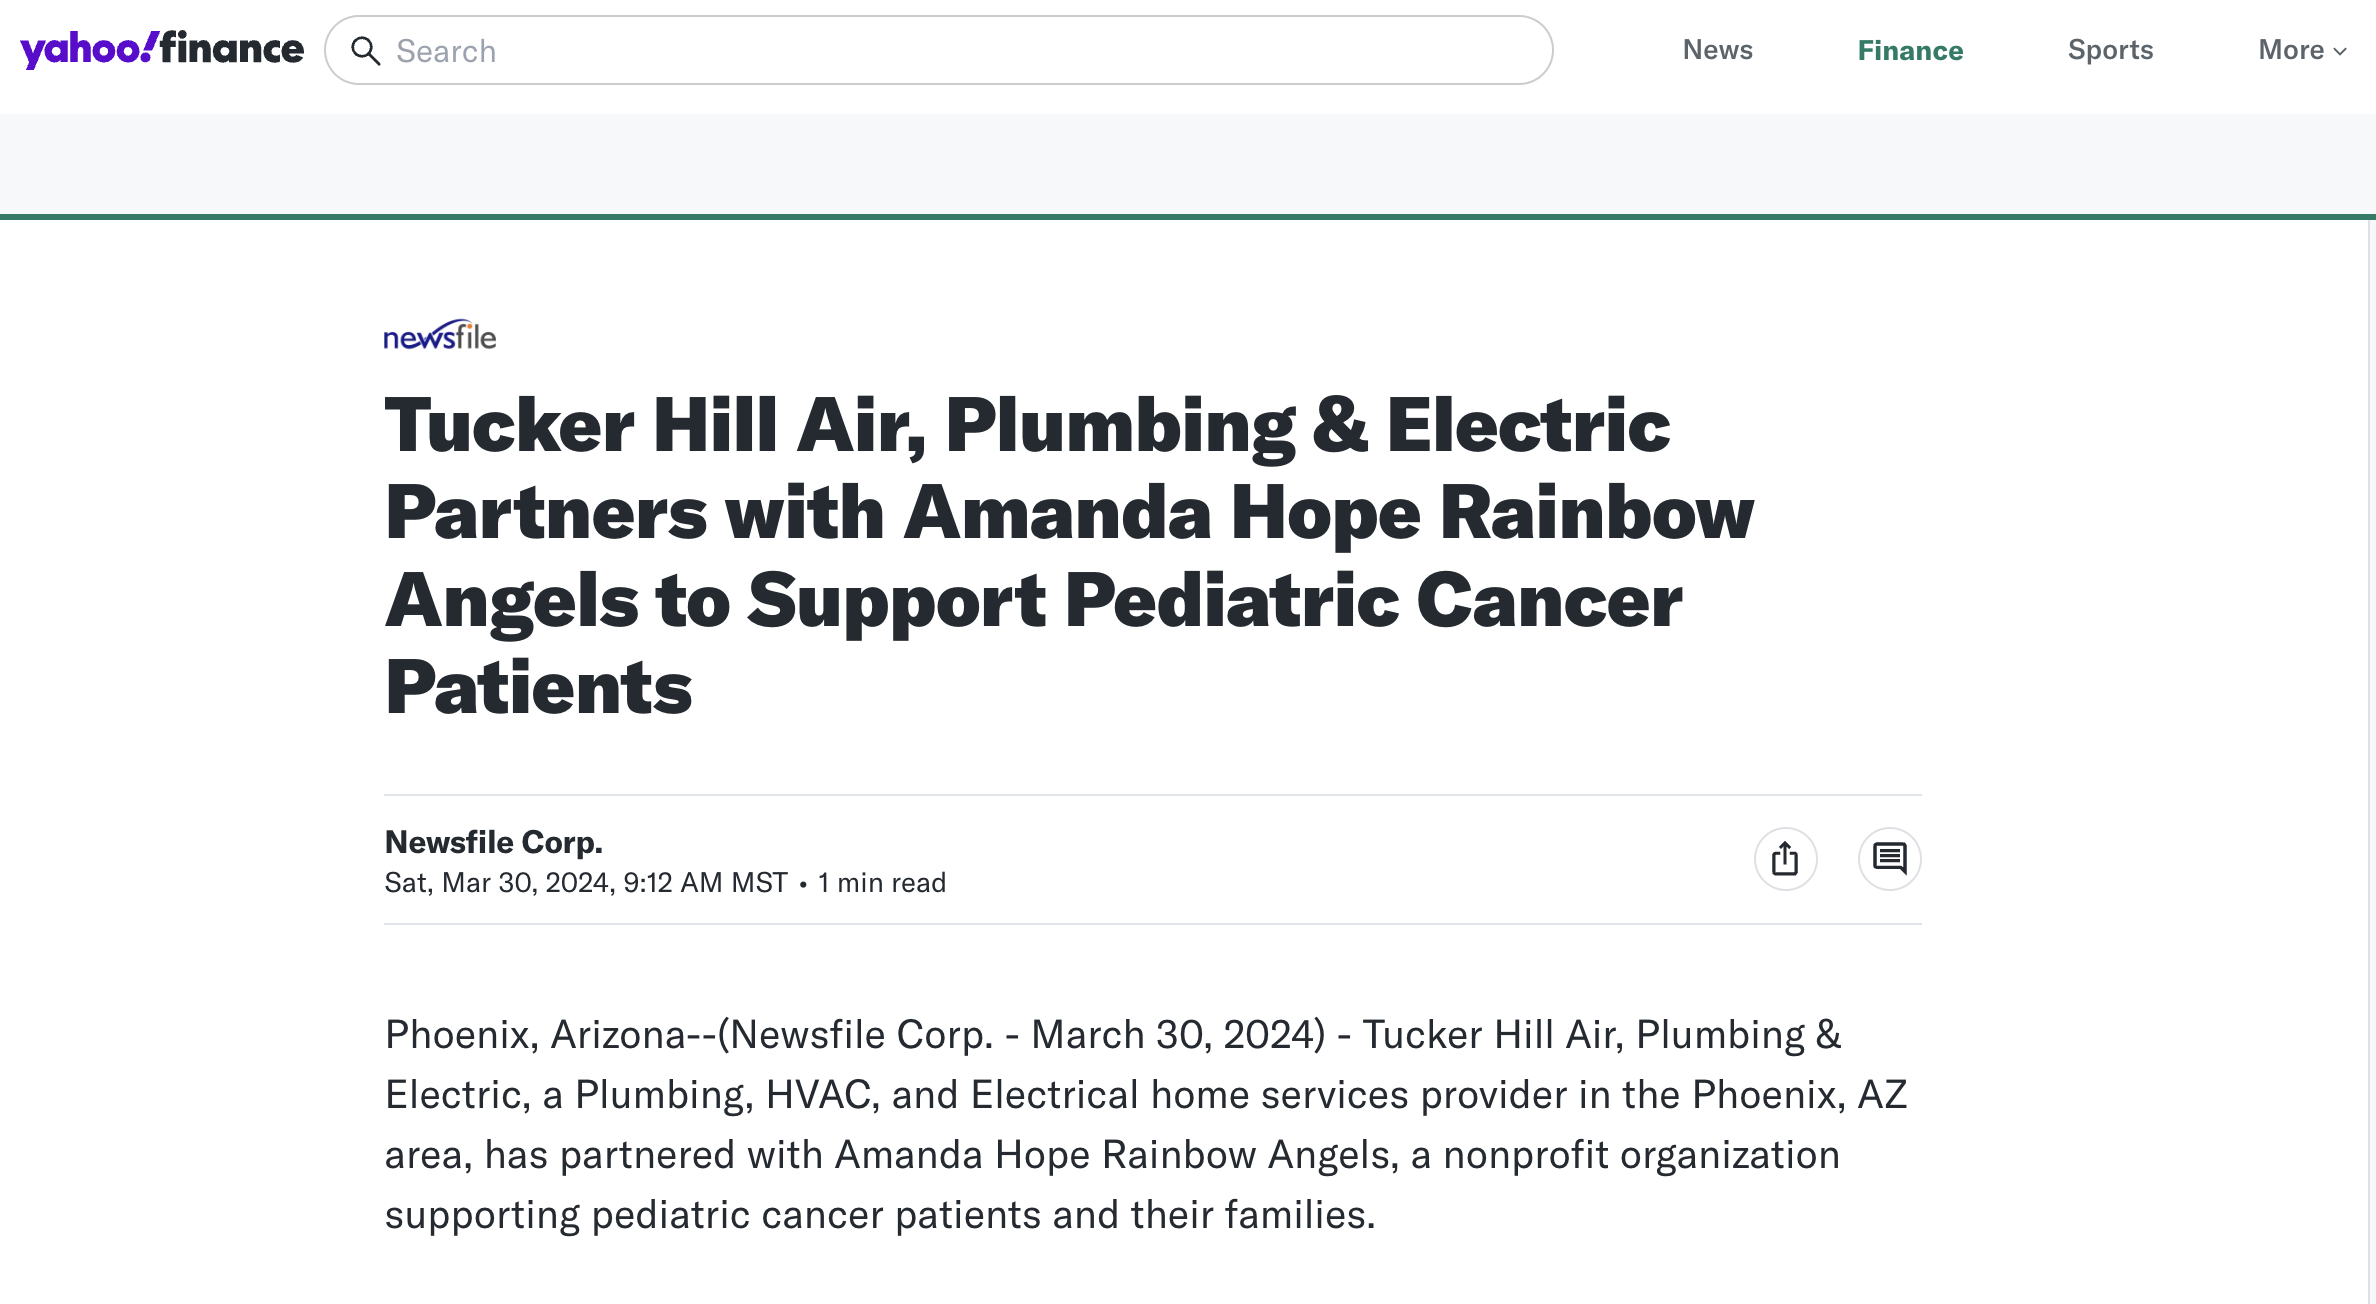 Newsfile Corp: Tucker Hill Air, Plumbing &amp; Electric Partners with Amanda Hope Rainbow Angels to Support Pediatric Cancer Patients